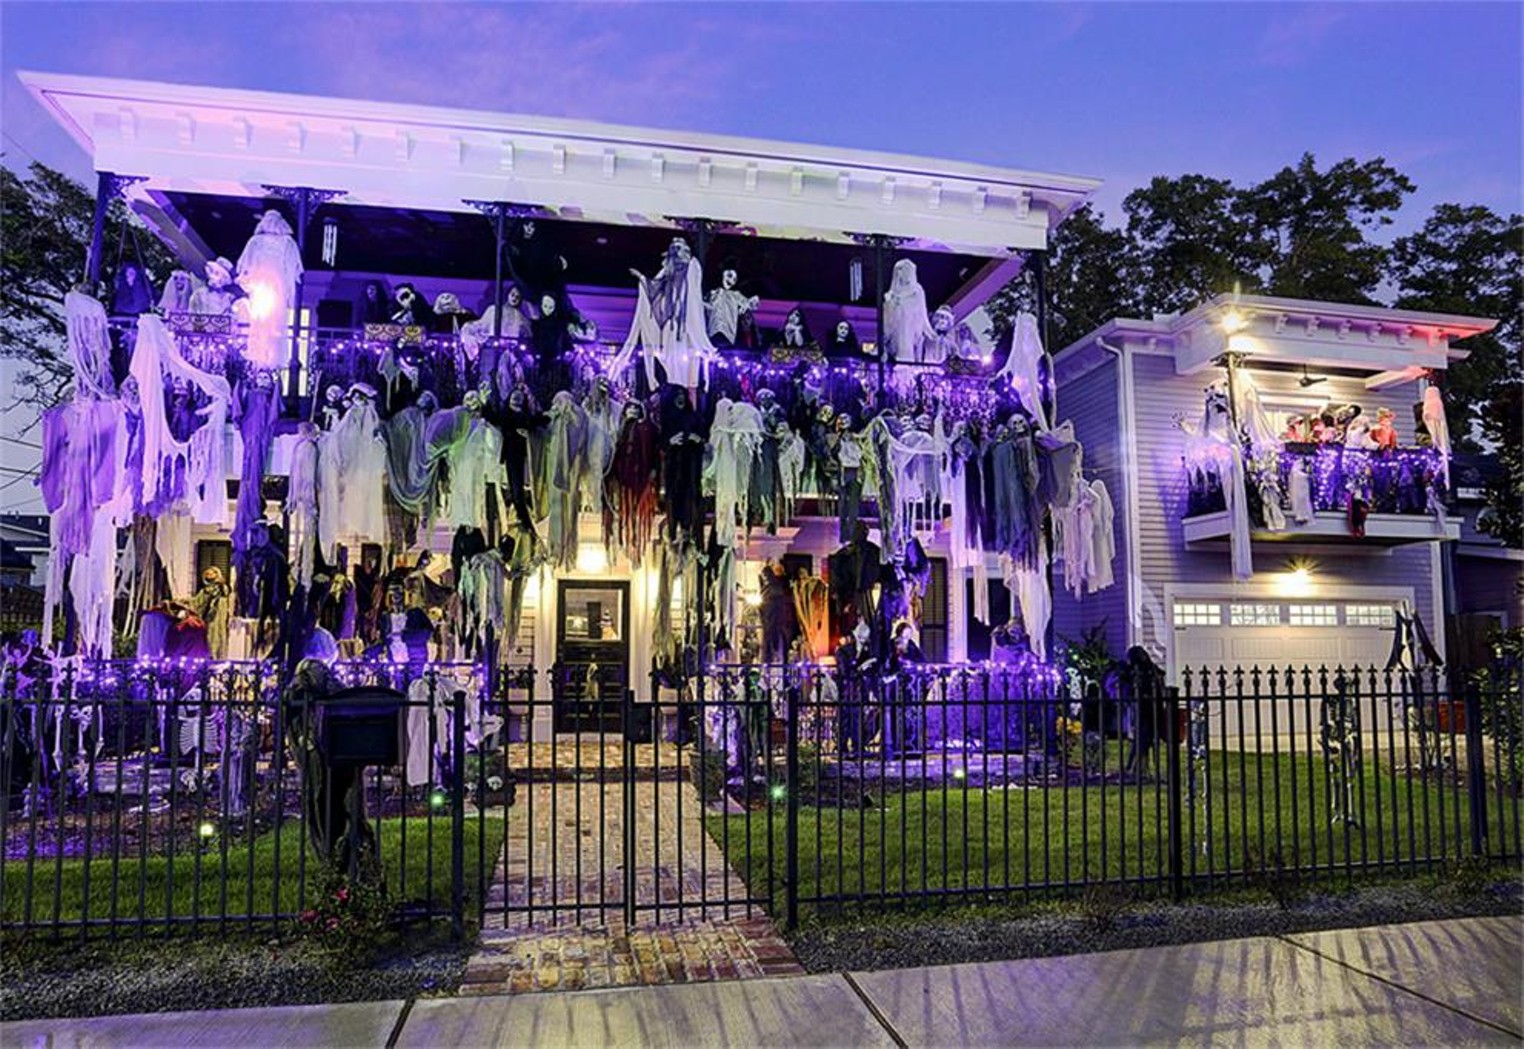 The Latest Trend in Houston Real Estate: Addams Family Decor ...